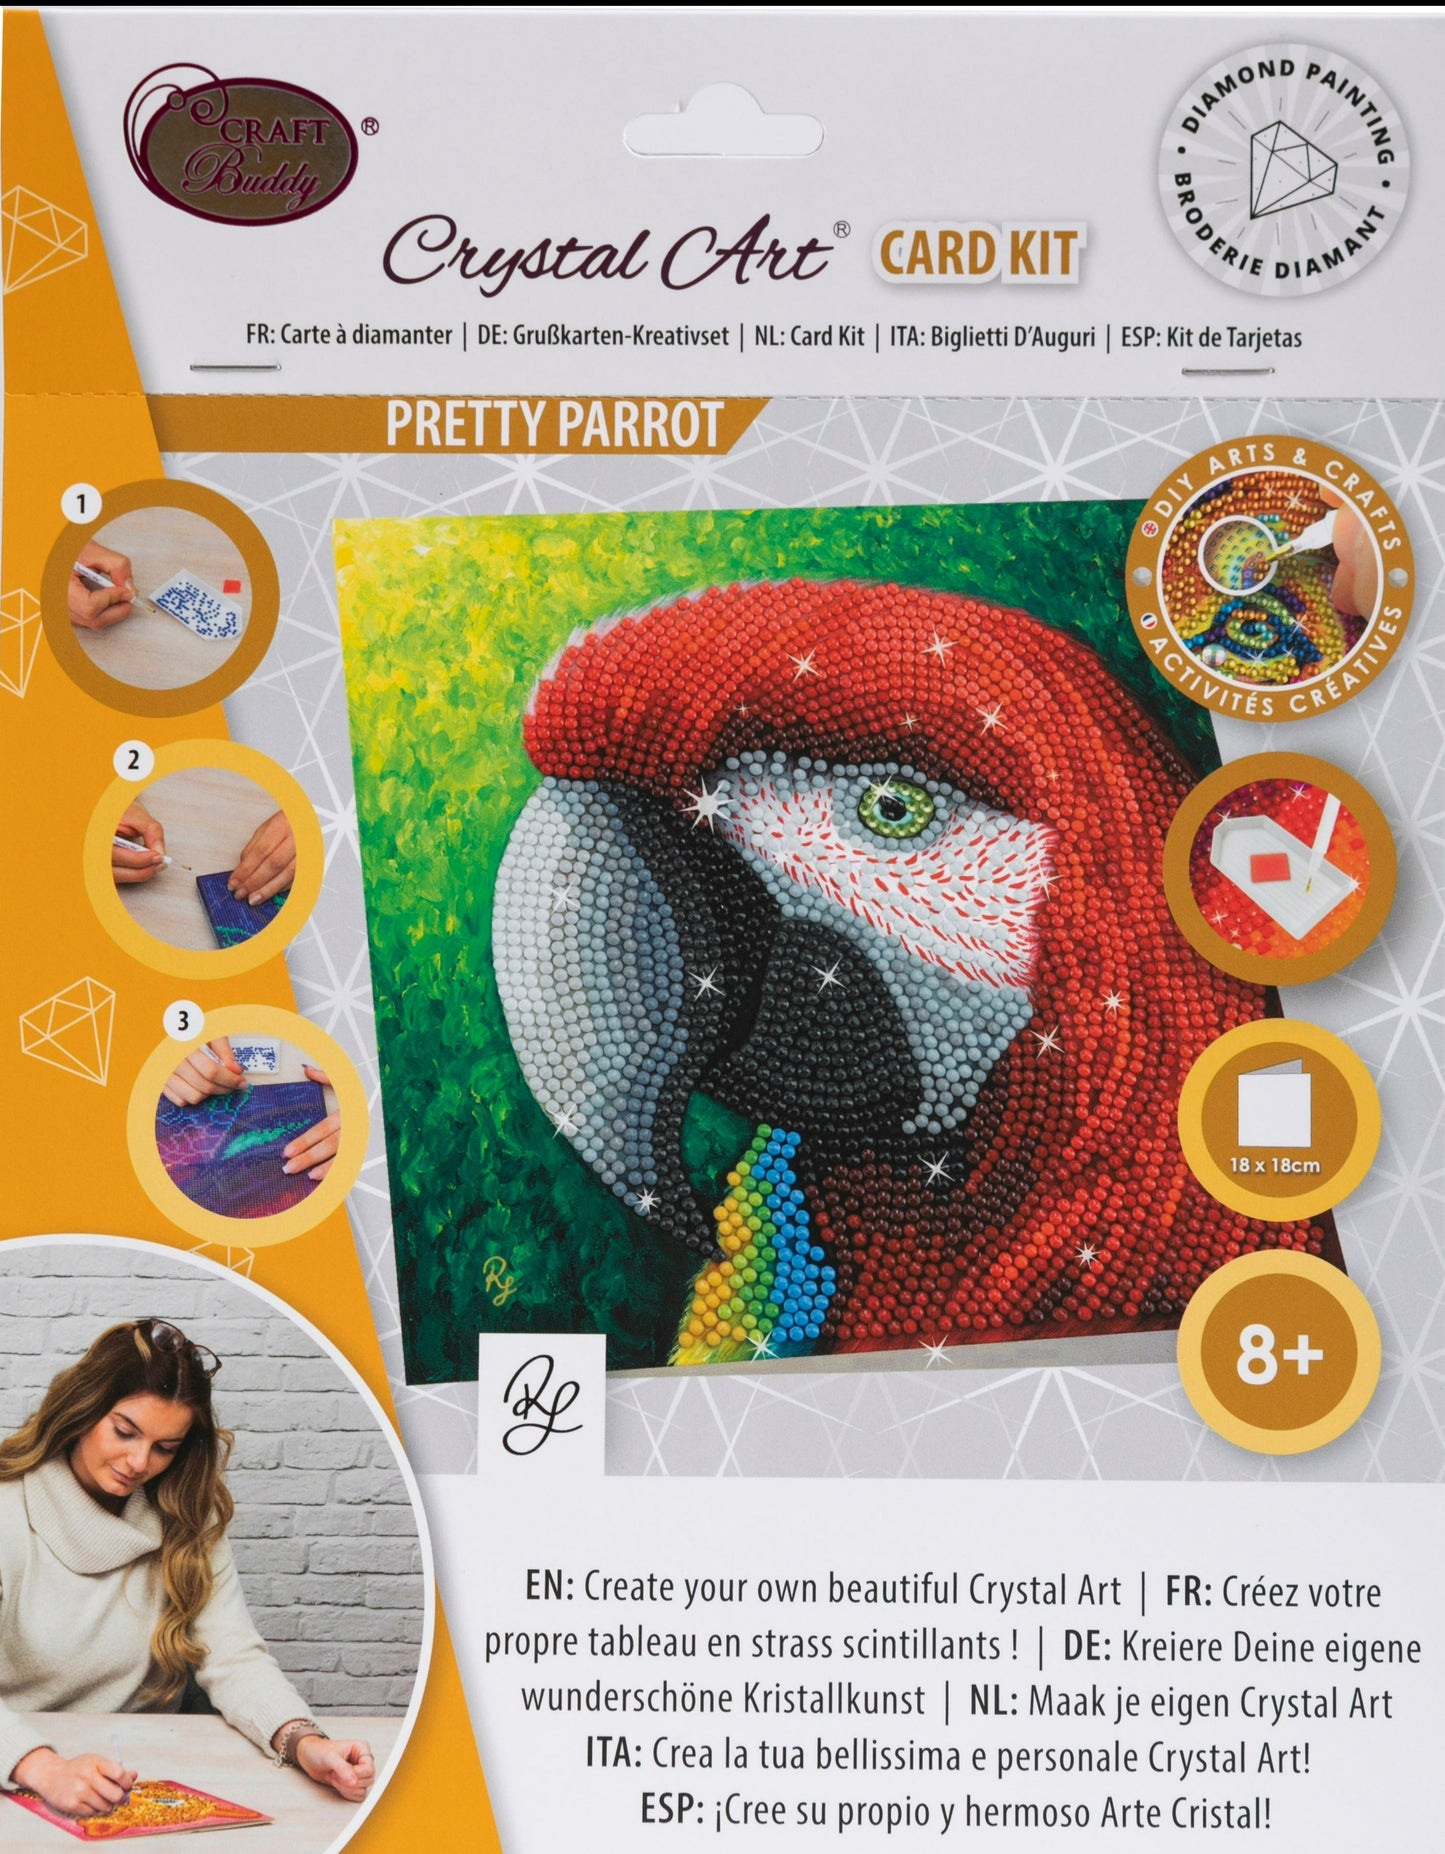 Pretty Parrot Crystal Art Card - Front Packaging